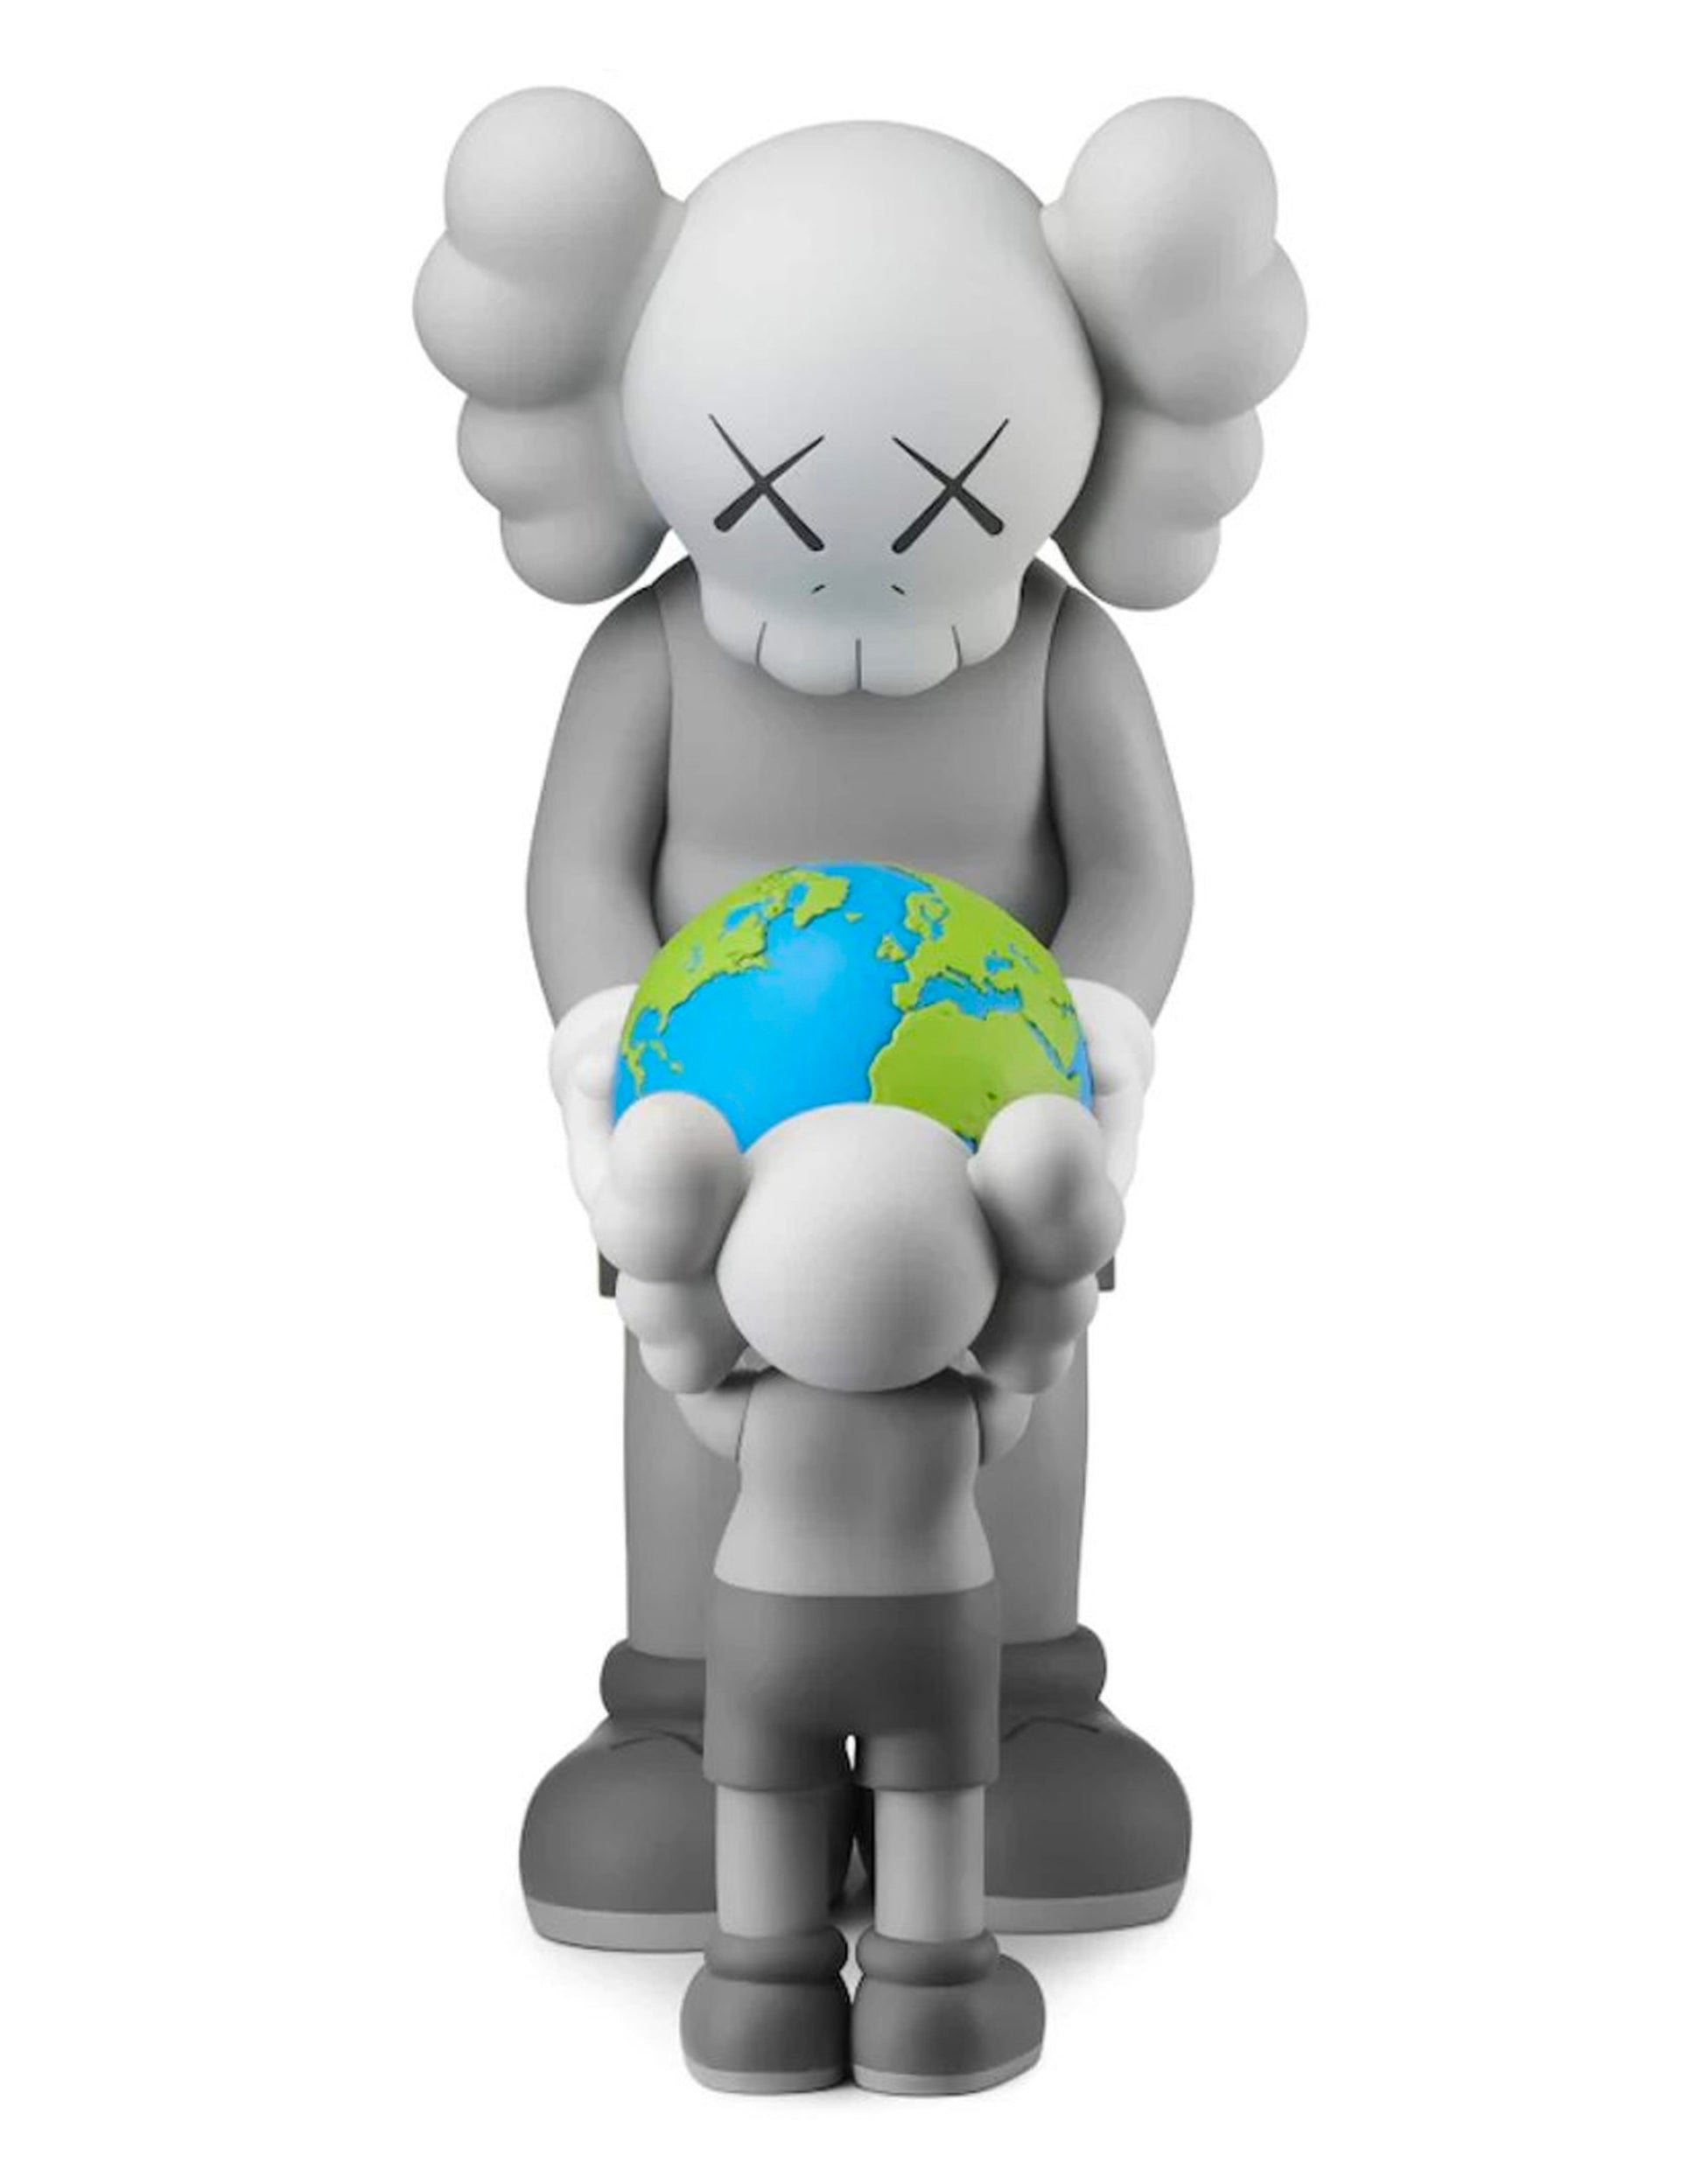 Kaws Gray Dissected Companion #toy Poster by Nur Hidayah - Mobile